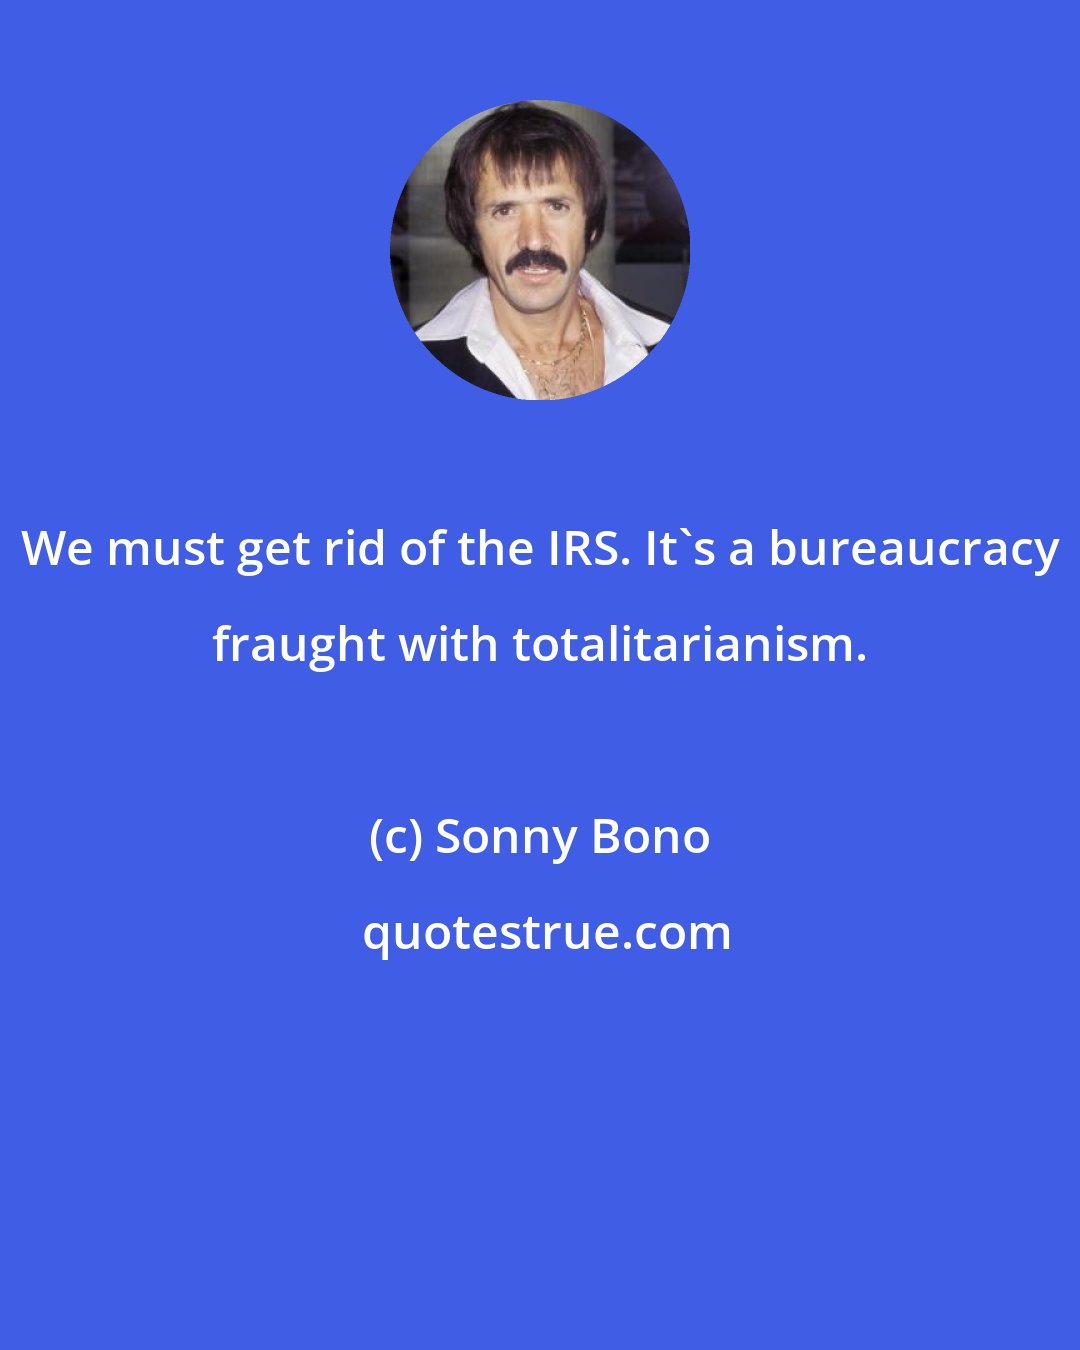 Sonny Bono: We must get rid of the IRS. It's a bureaucracy fraught with totalitarianism.